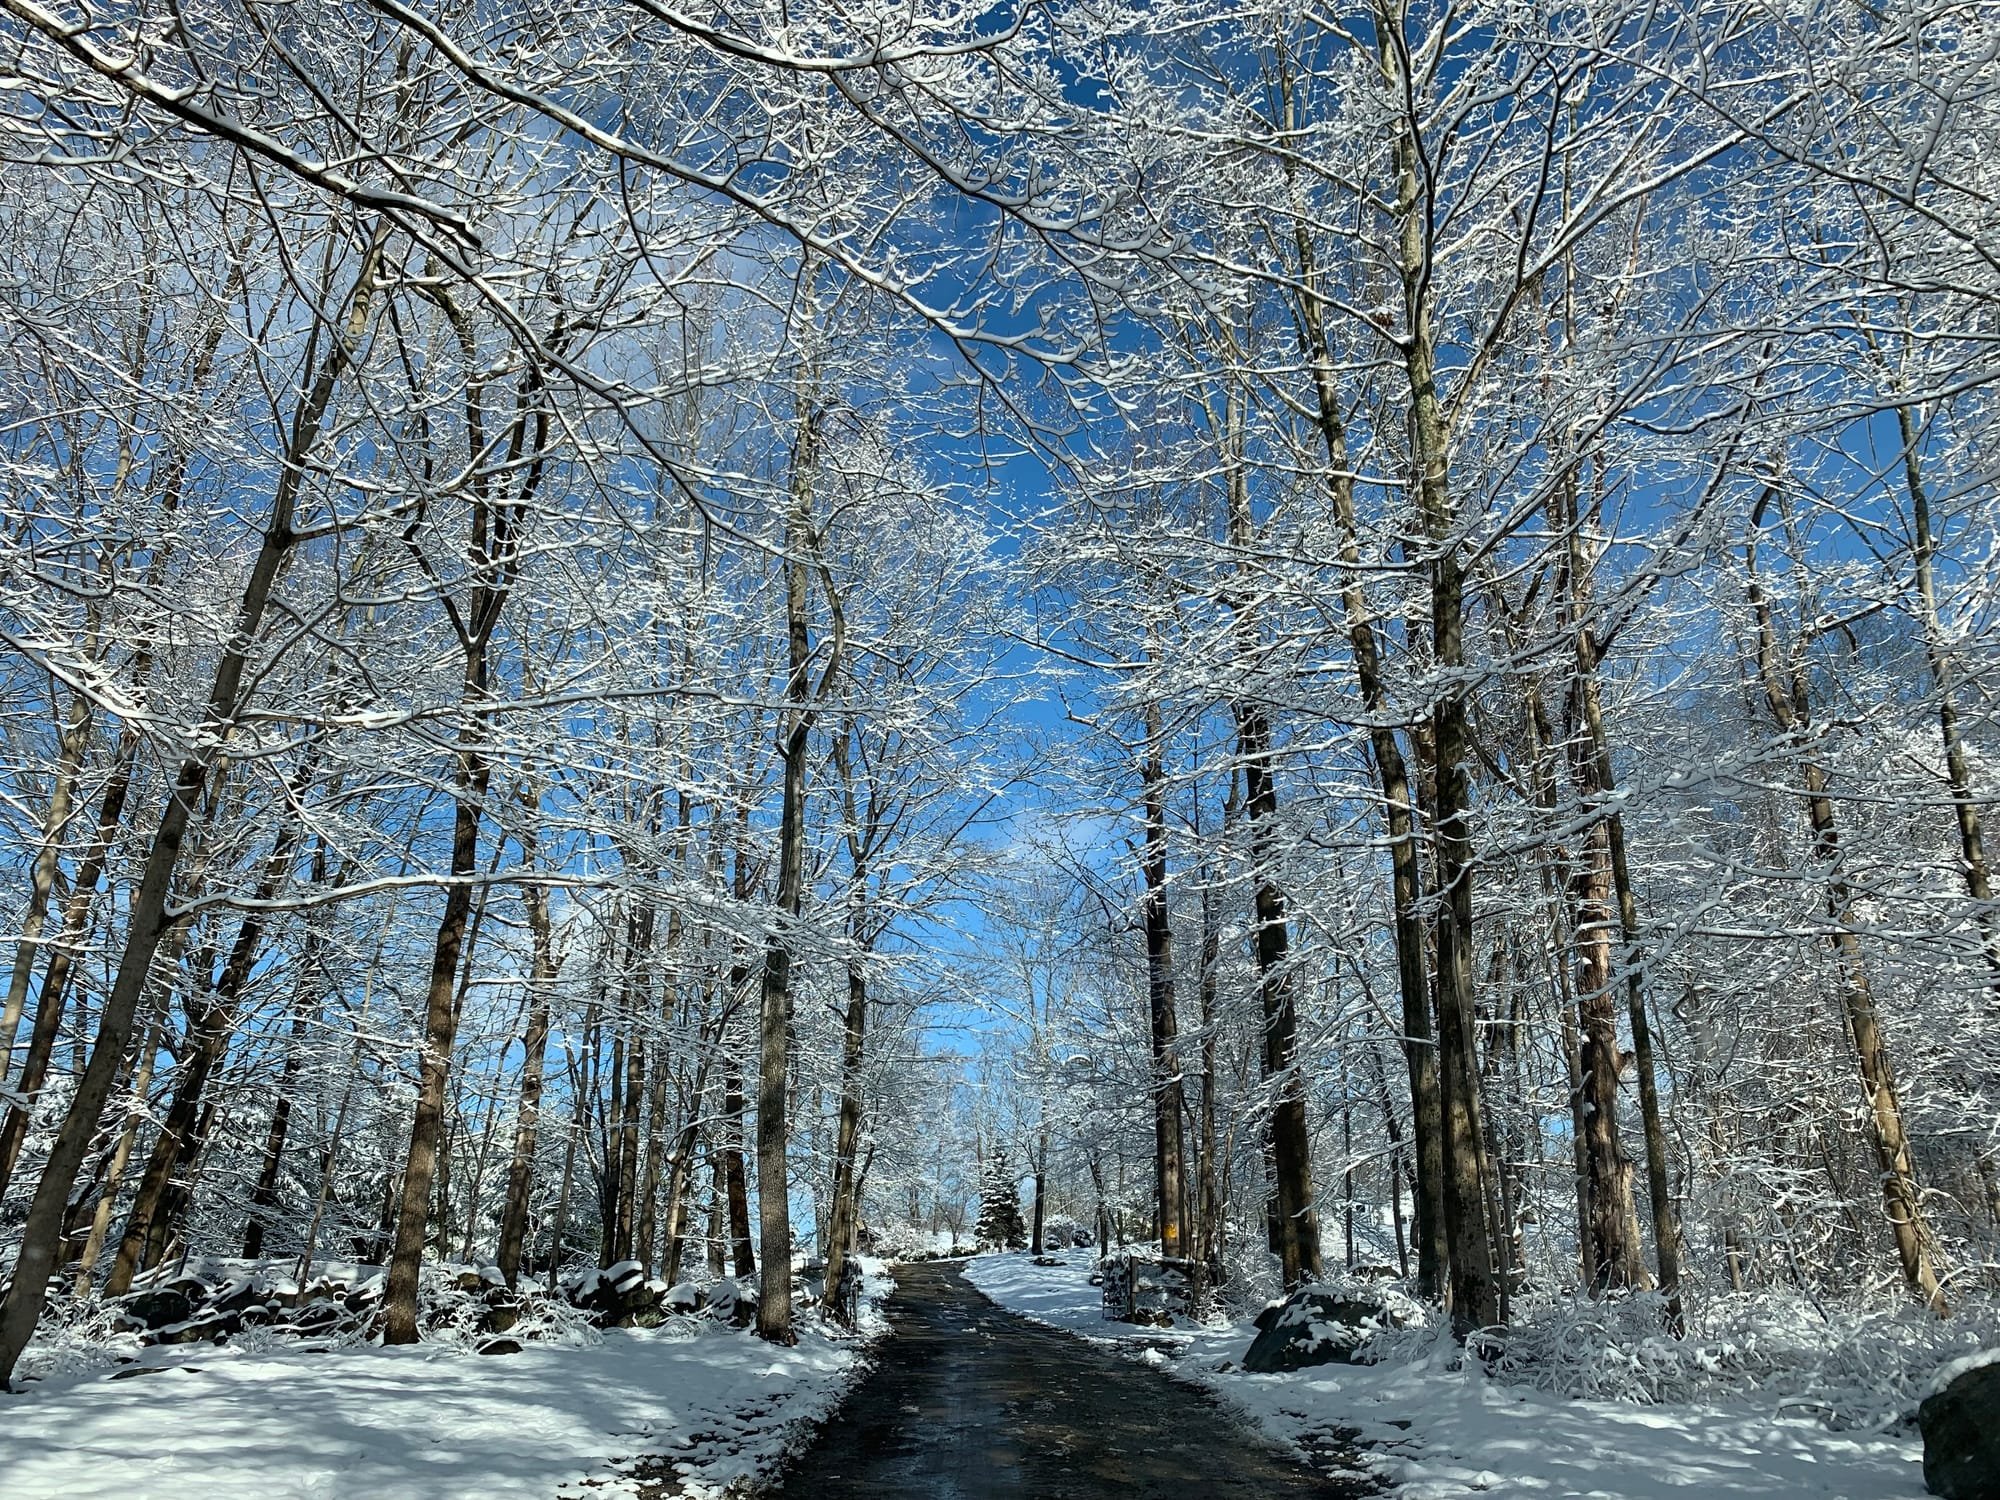 The beautiful drive up to the barn after a snow